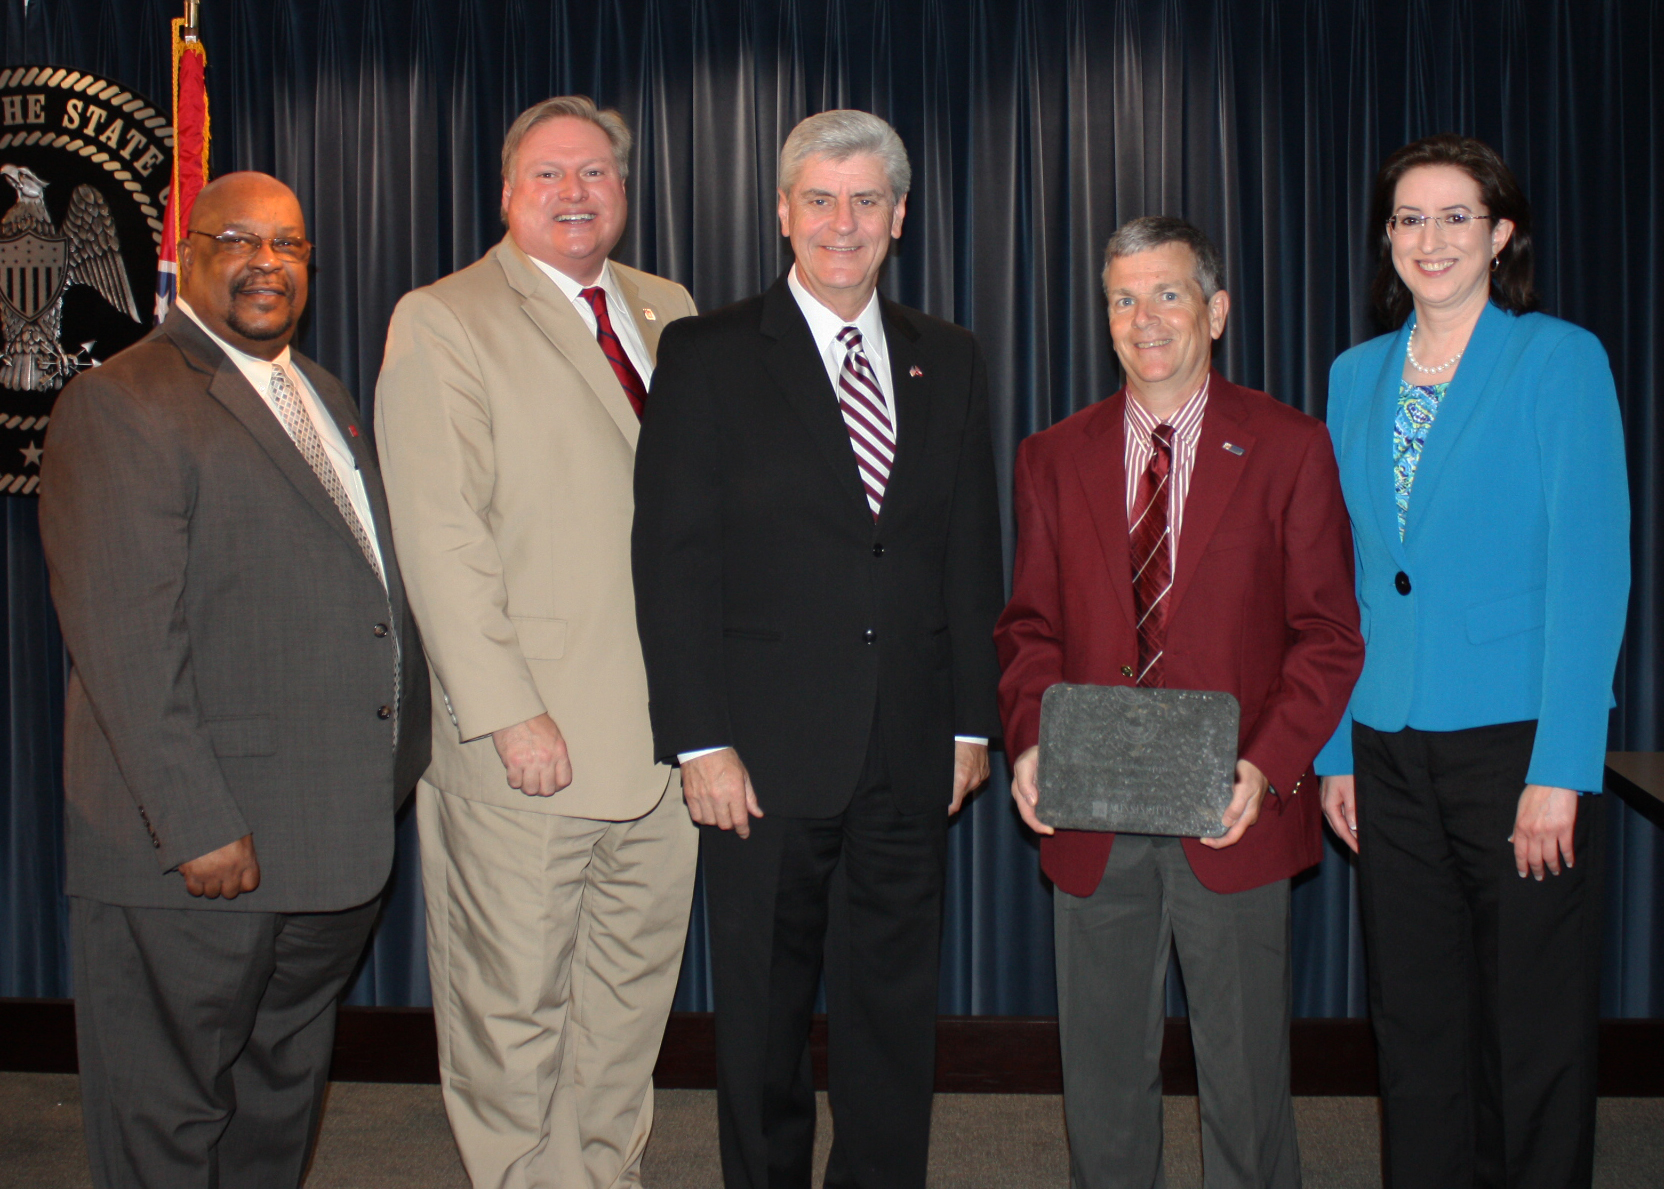 Mississippi State Personnel Board Member Donald Brown, from left, MSPB Chairman Alwyn Luckey, Gov. Phil Bryant, Mississippi State University Director of Procurement and Contracts Don Buffum, and MSPB Executive Director Deanne Mosley.